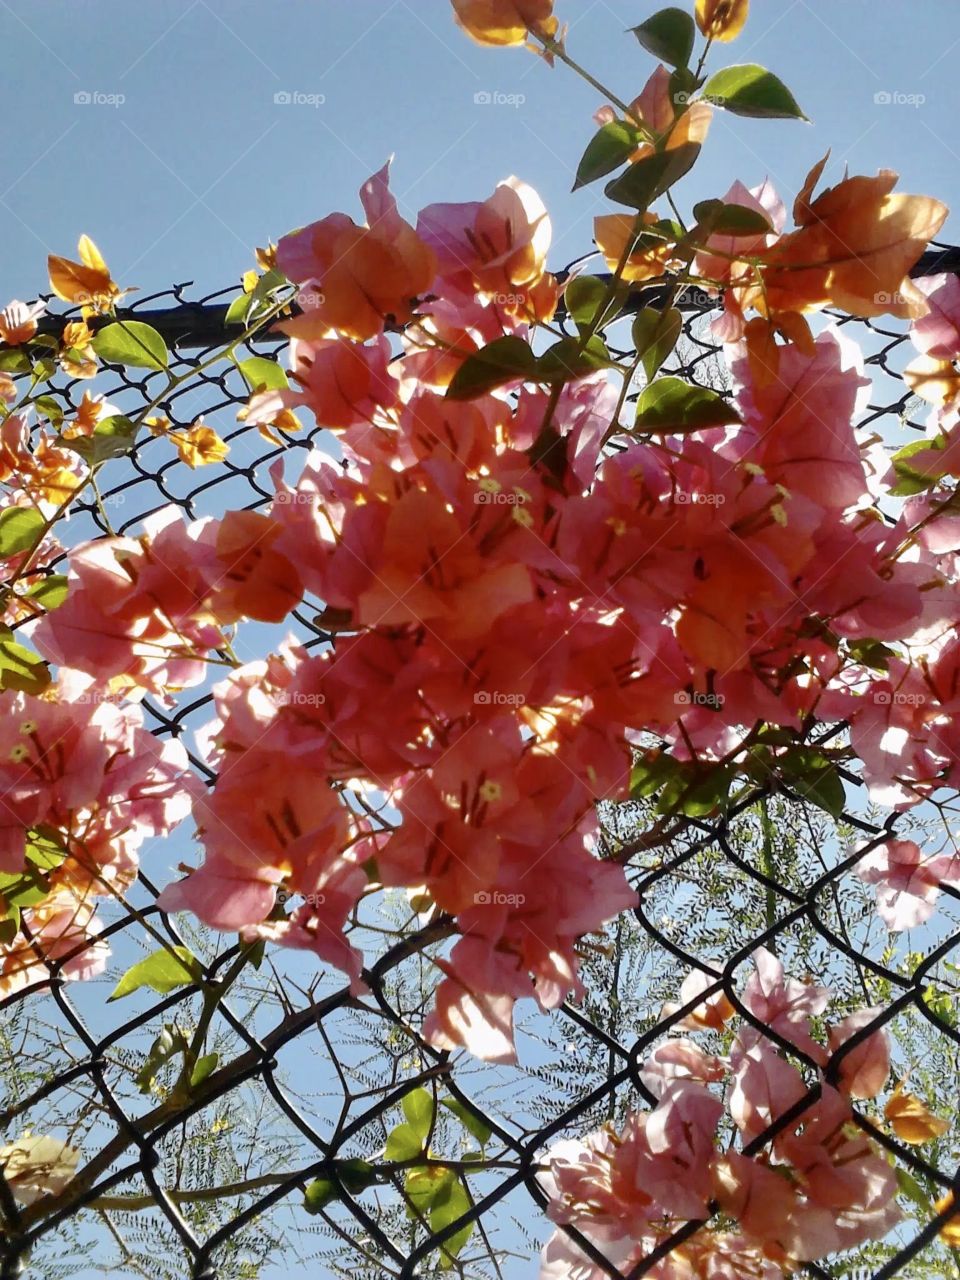 Flowers, chain length fence and blue sky.